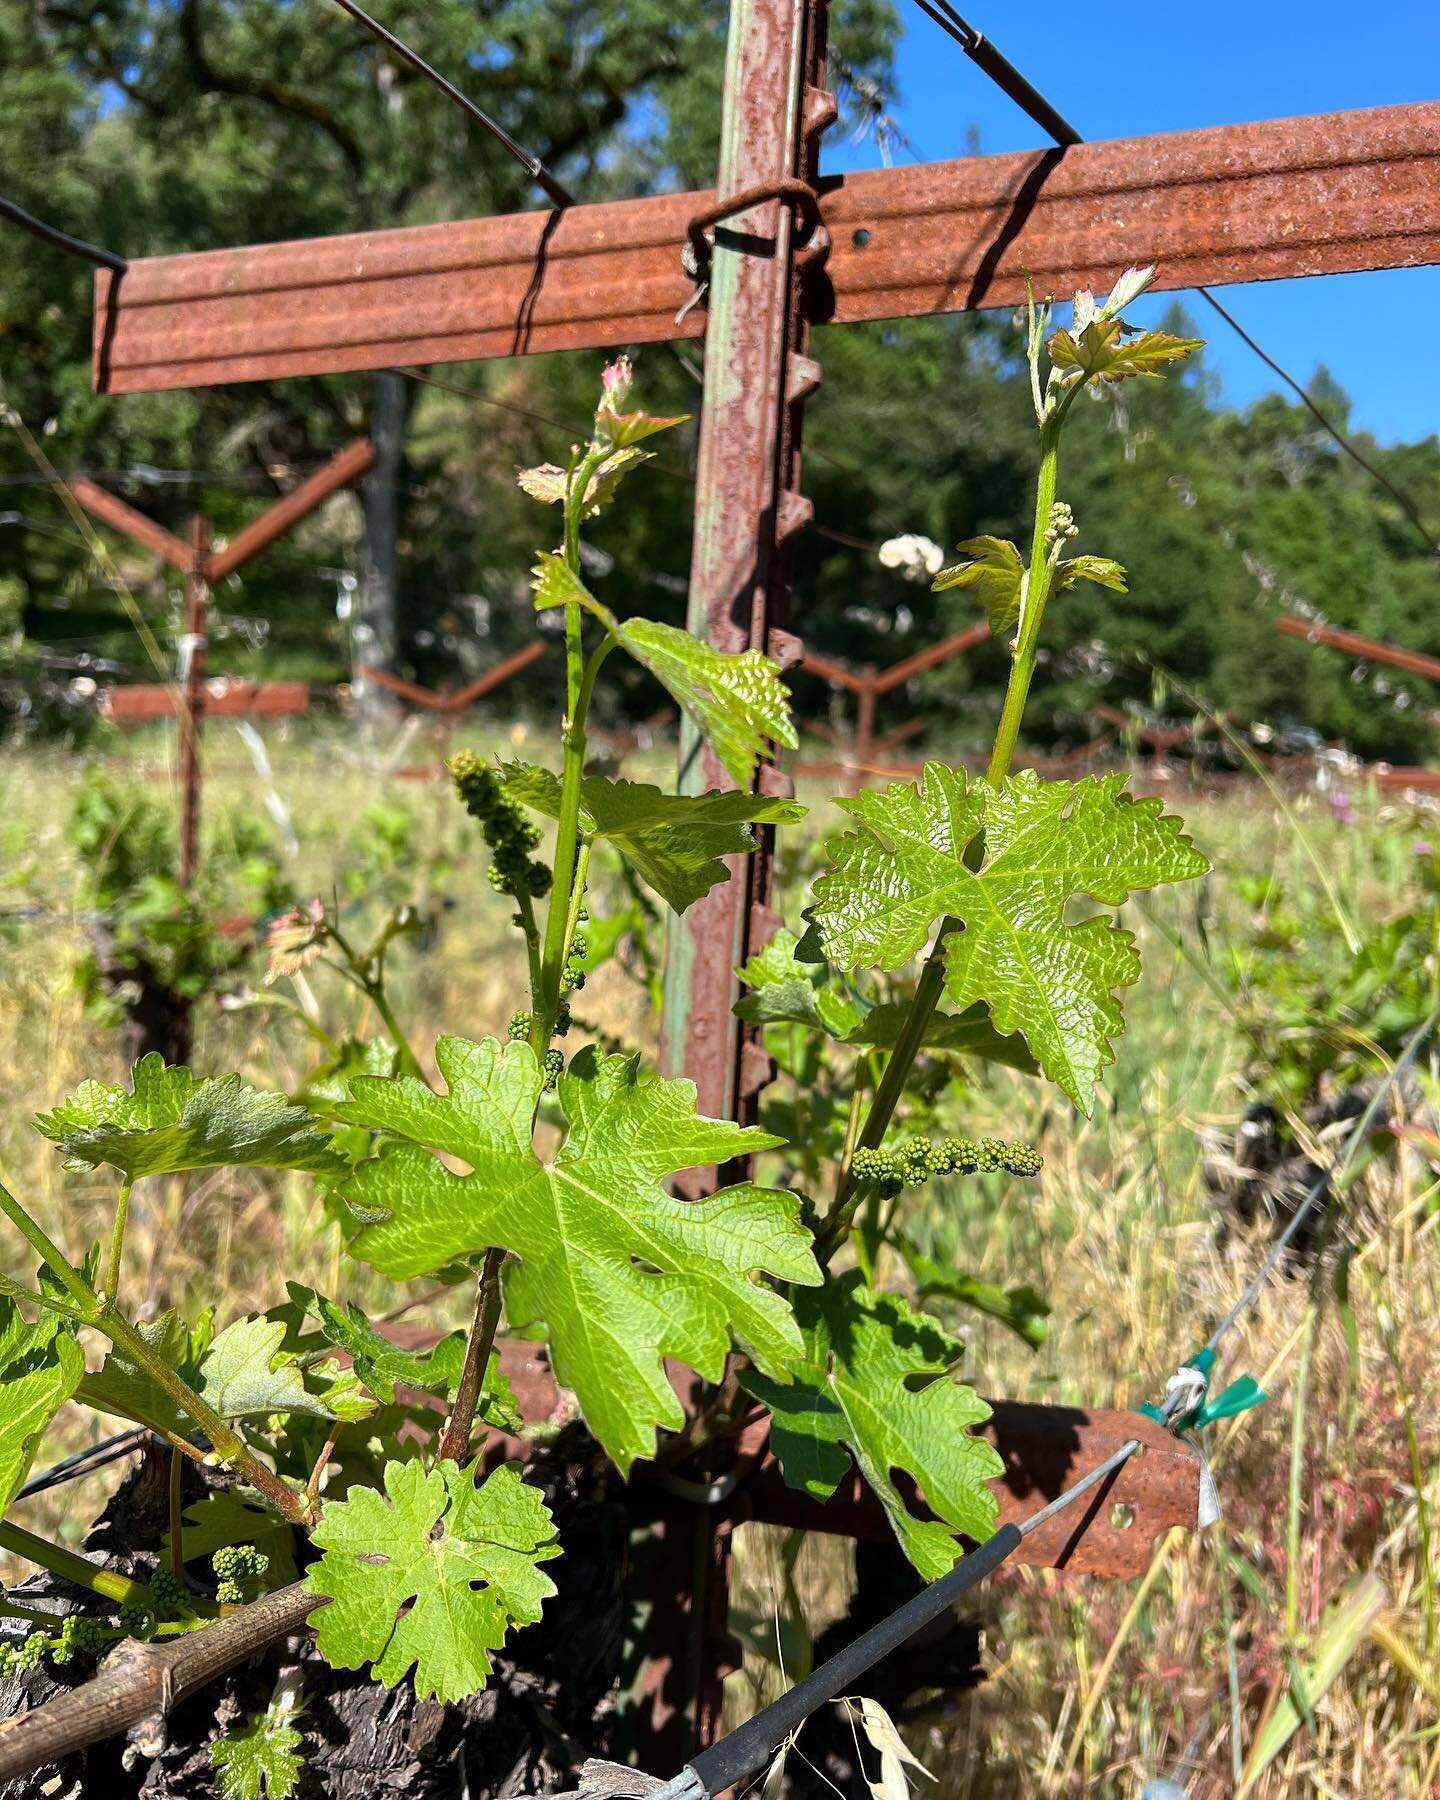 With water in the soil and sun in the sky, the shoots are taking off 🚀🚀🚀🚀🚀

#napavalley #napa #winecountry #sthelena #rustonfamilyvineyards #wine #winelover